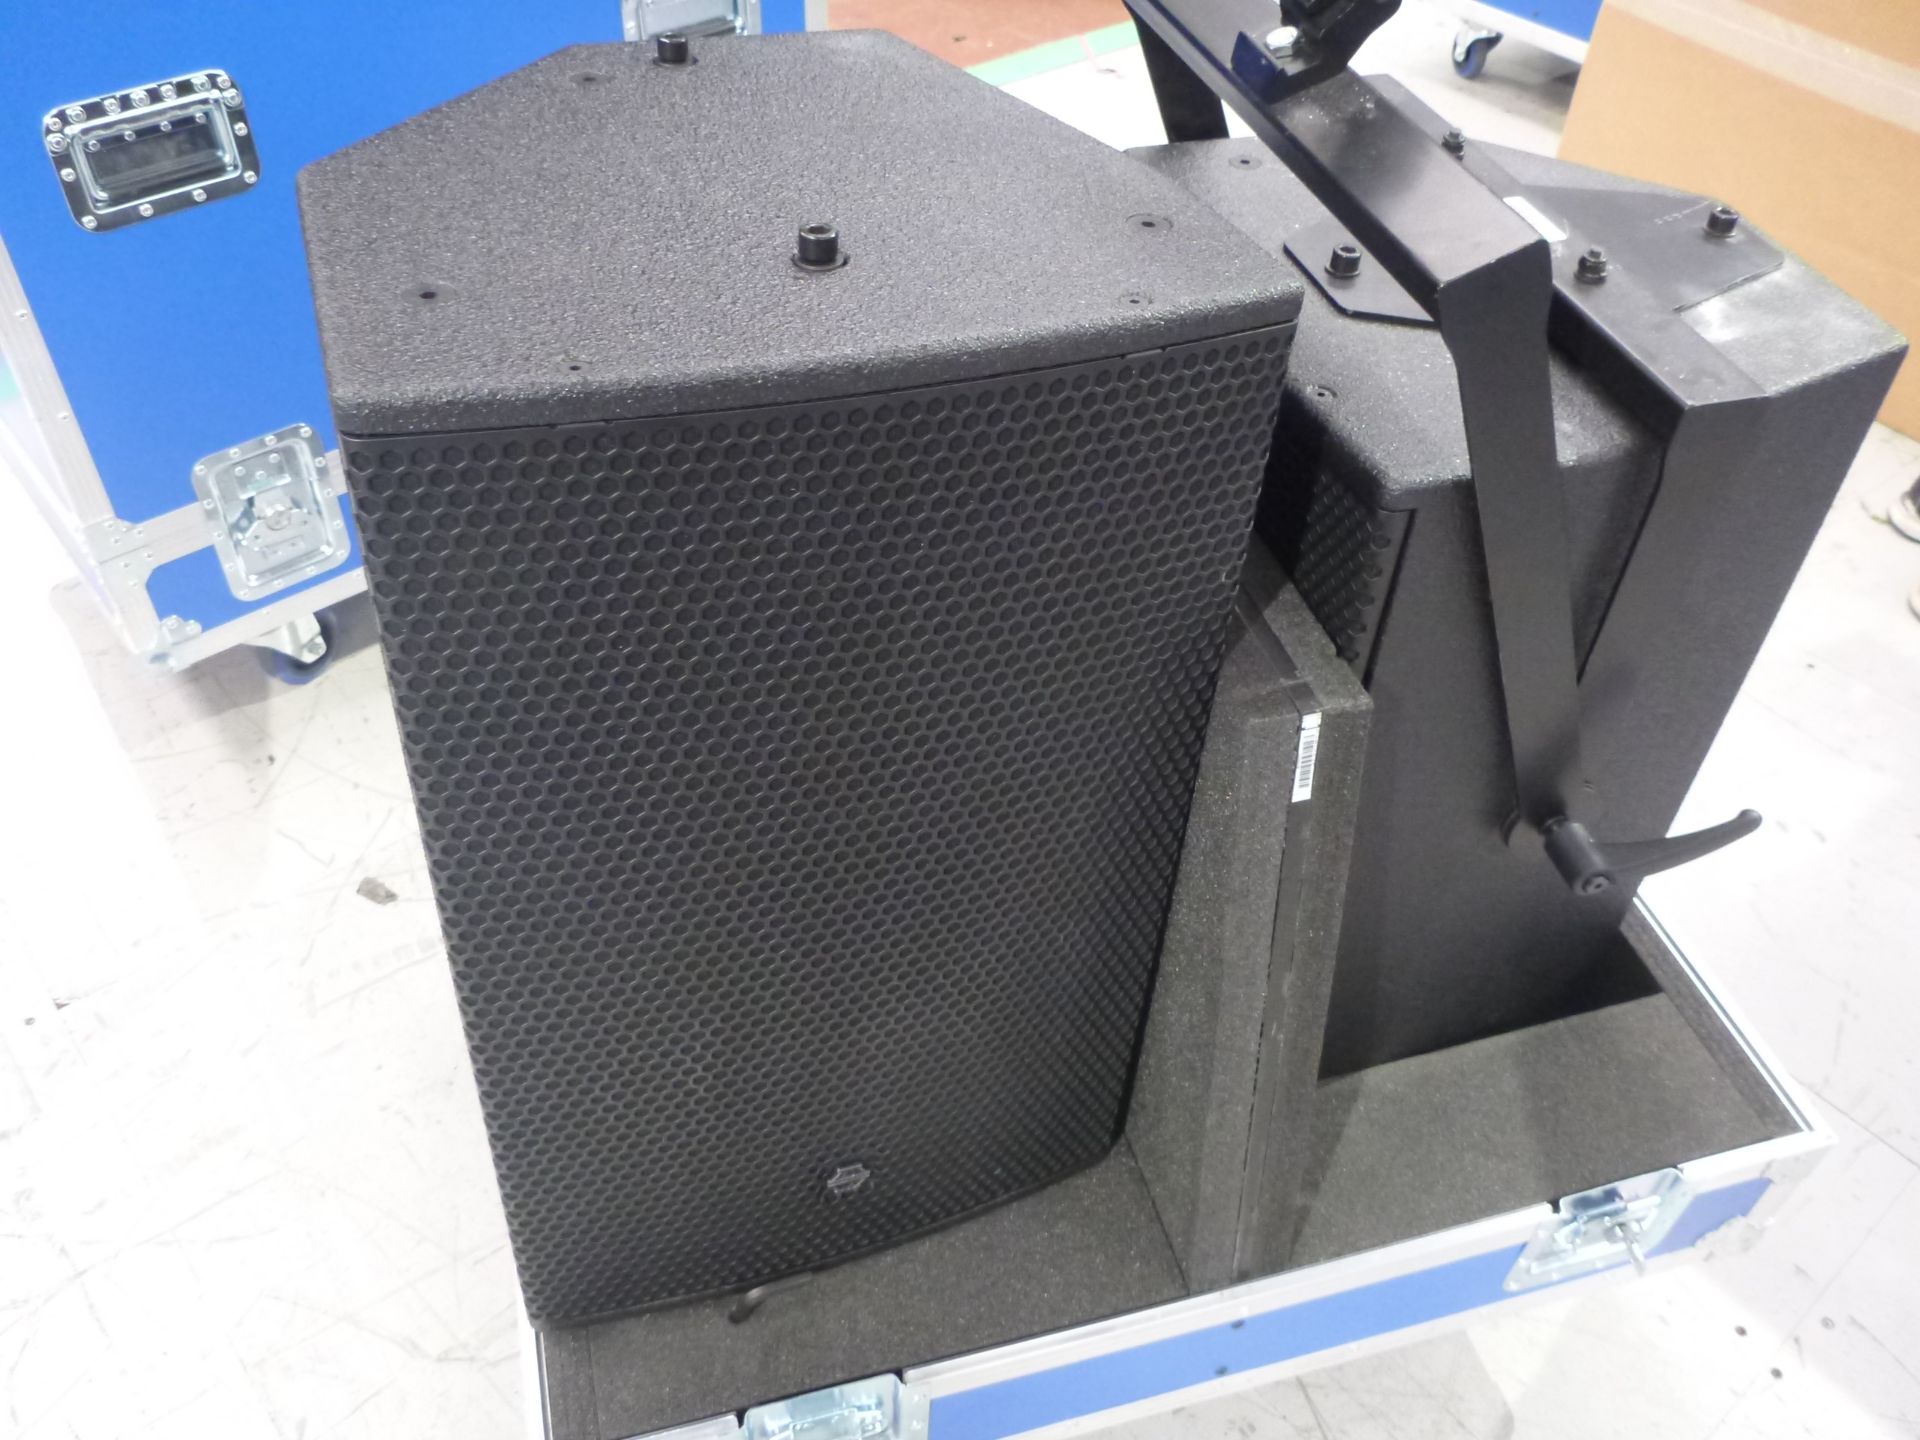 EM Acoustics EMS-129 Wide Dispersion Passive Loudspeakers (Pair) In flight case with 1 x flying - Image 2 of 7